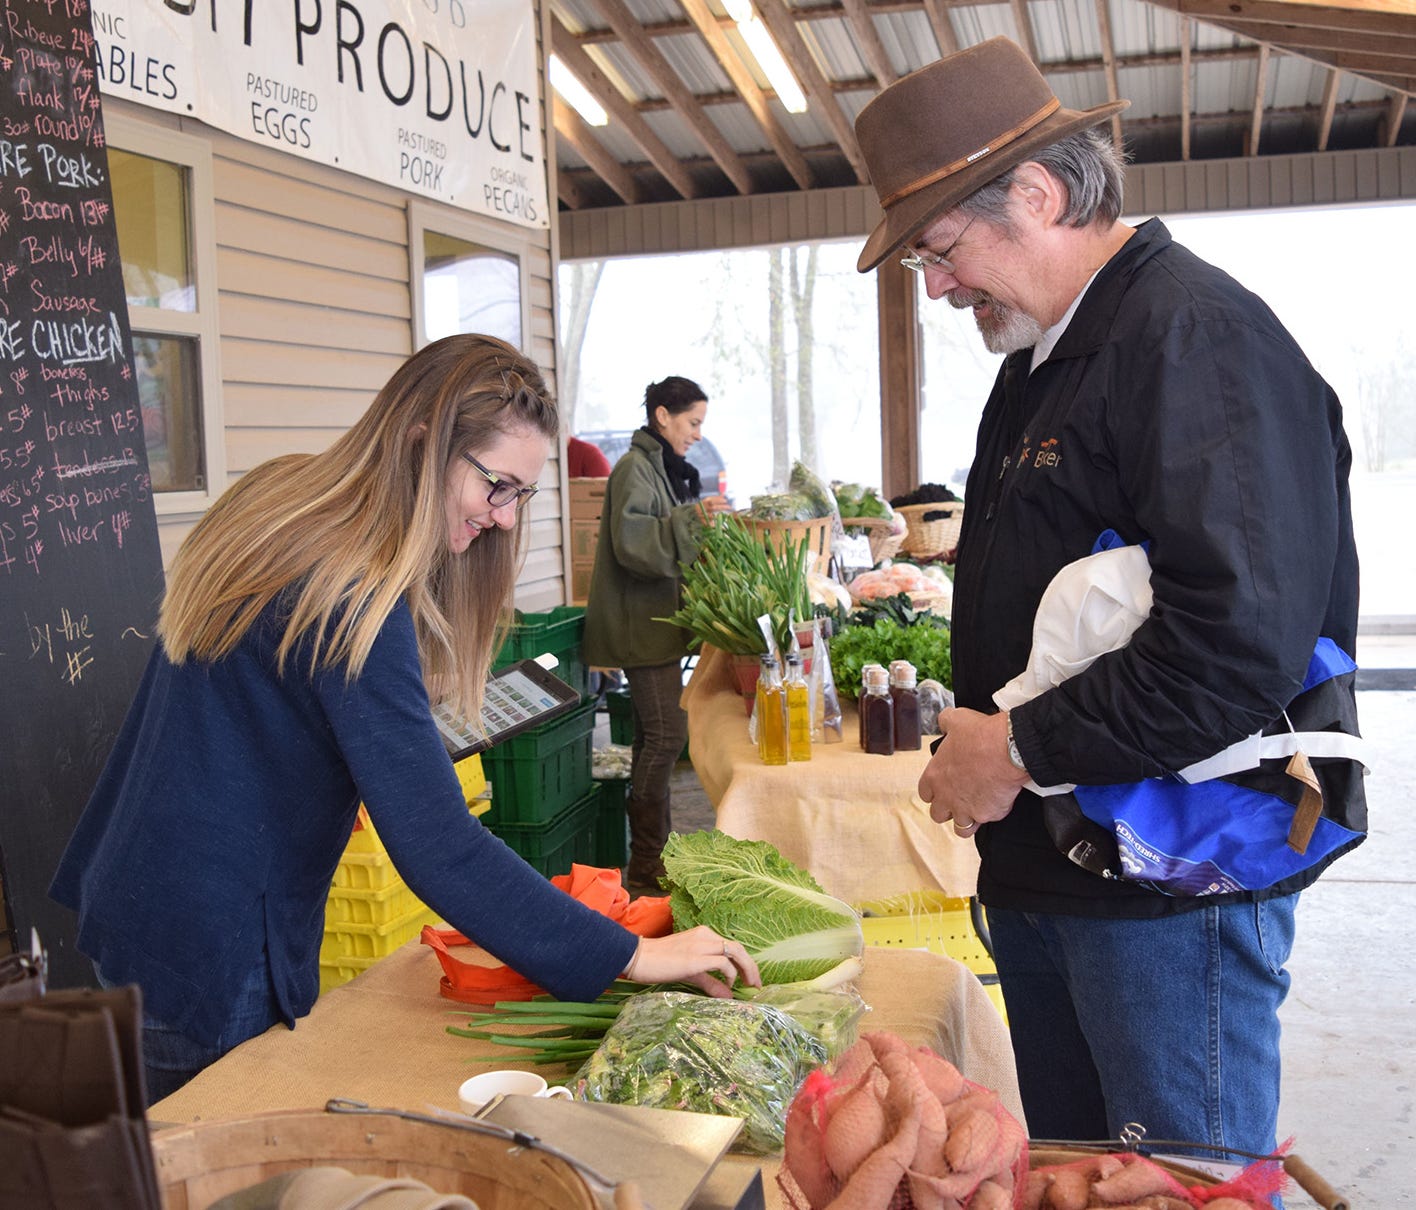 Carmen Buswell rings up produce for Robert Zoehfeld at the Inglewood Farm Saturday market in Alexandria, La. Inglewood Farm uses the Louisiana Grown logo on its website and farmers market displays.